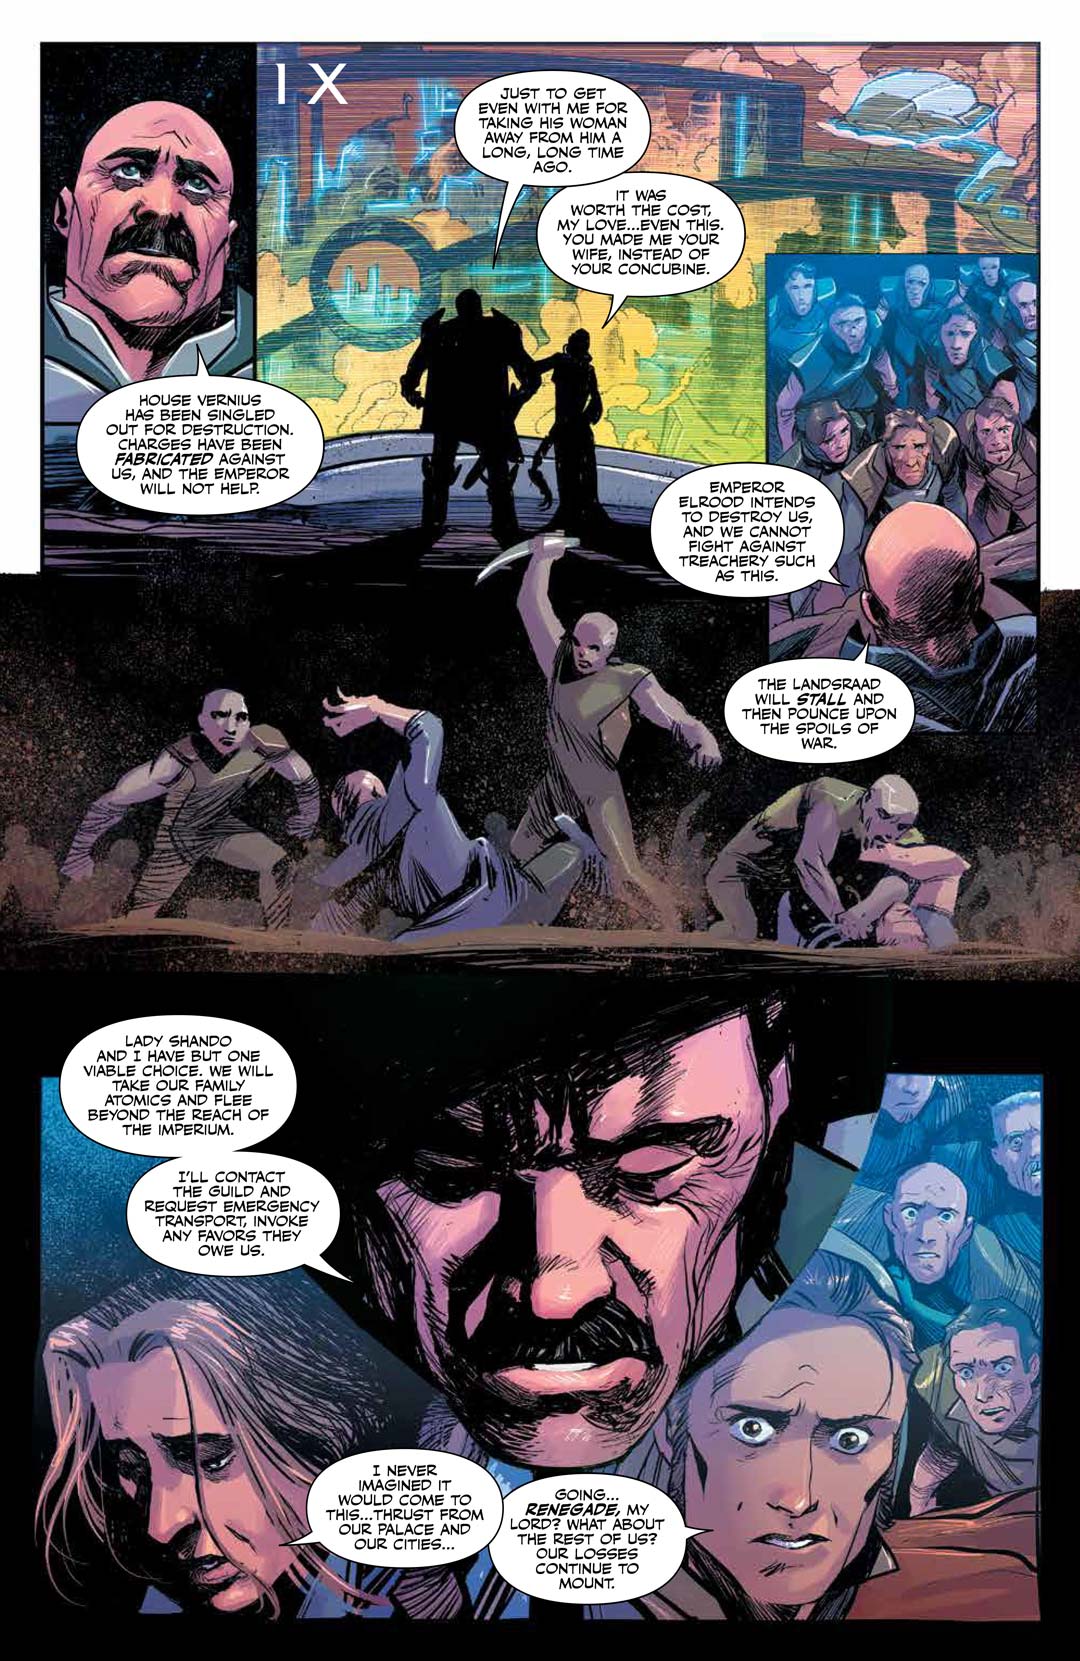 Dune: House Atreides comic series. Issue #6, preview page 6.